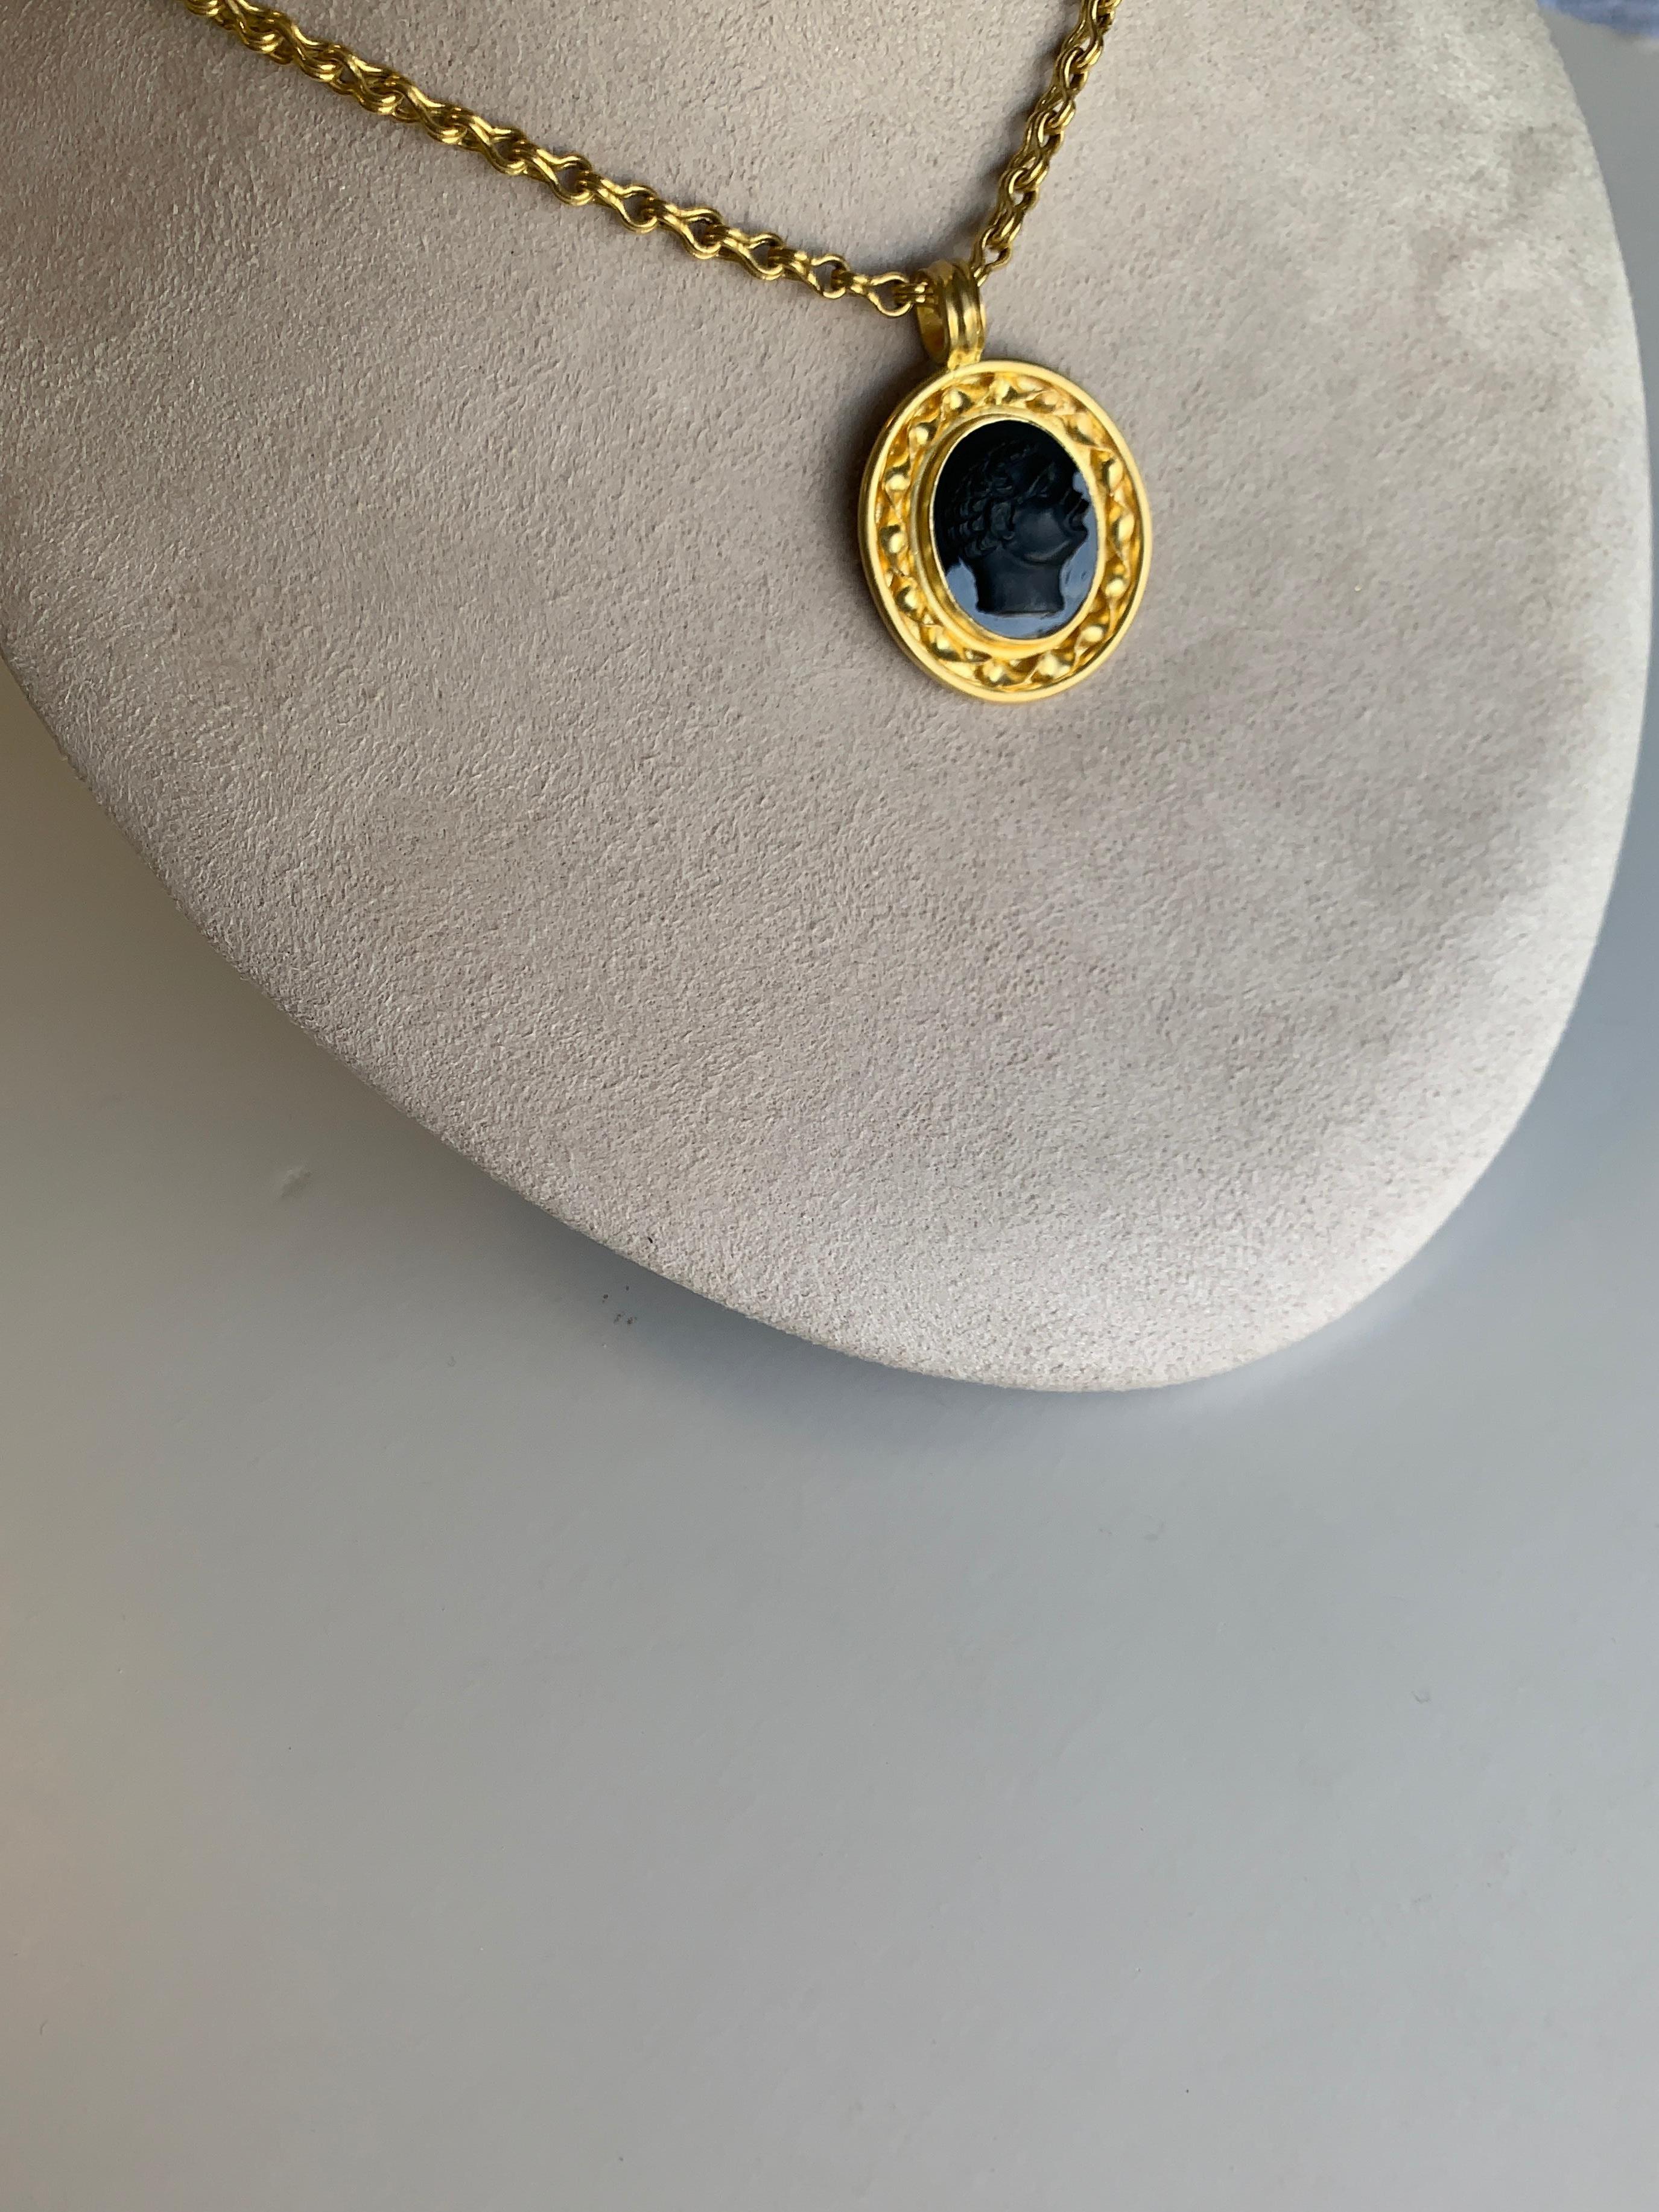 Classical Roman Gold and Onyx Cameo Pendant For Sale